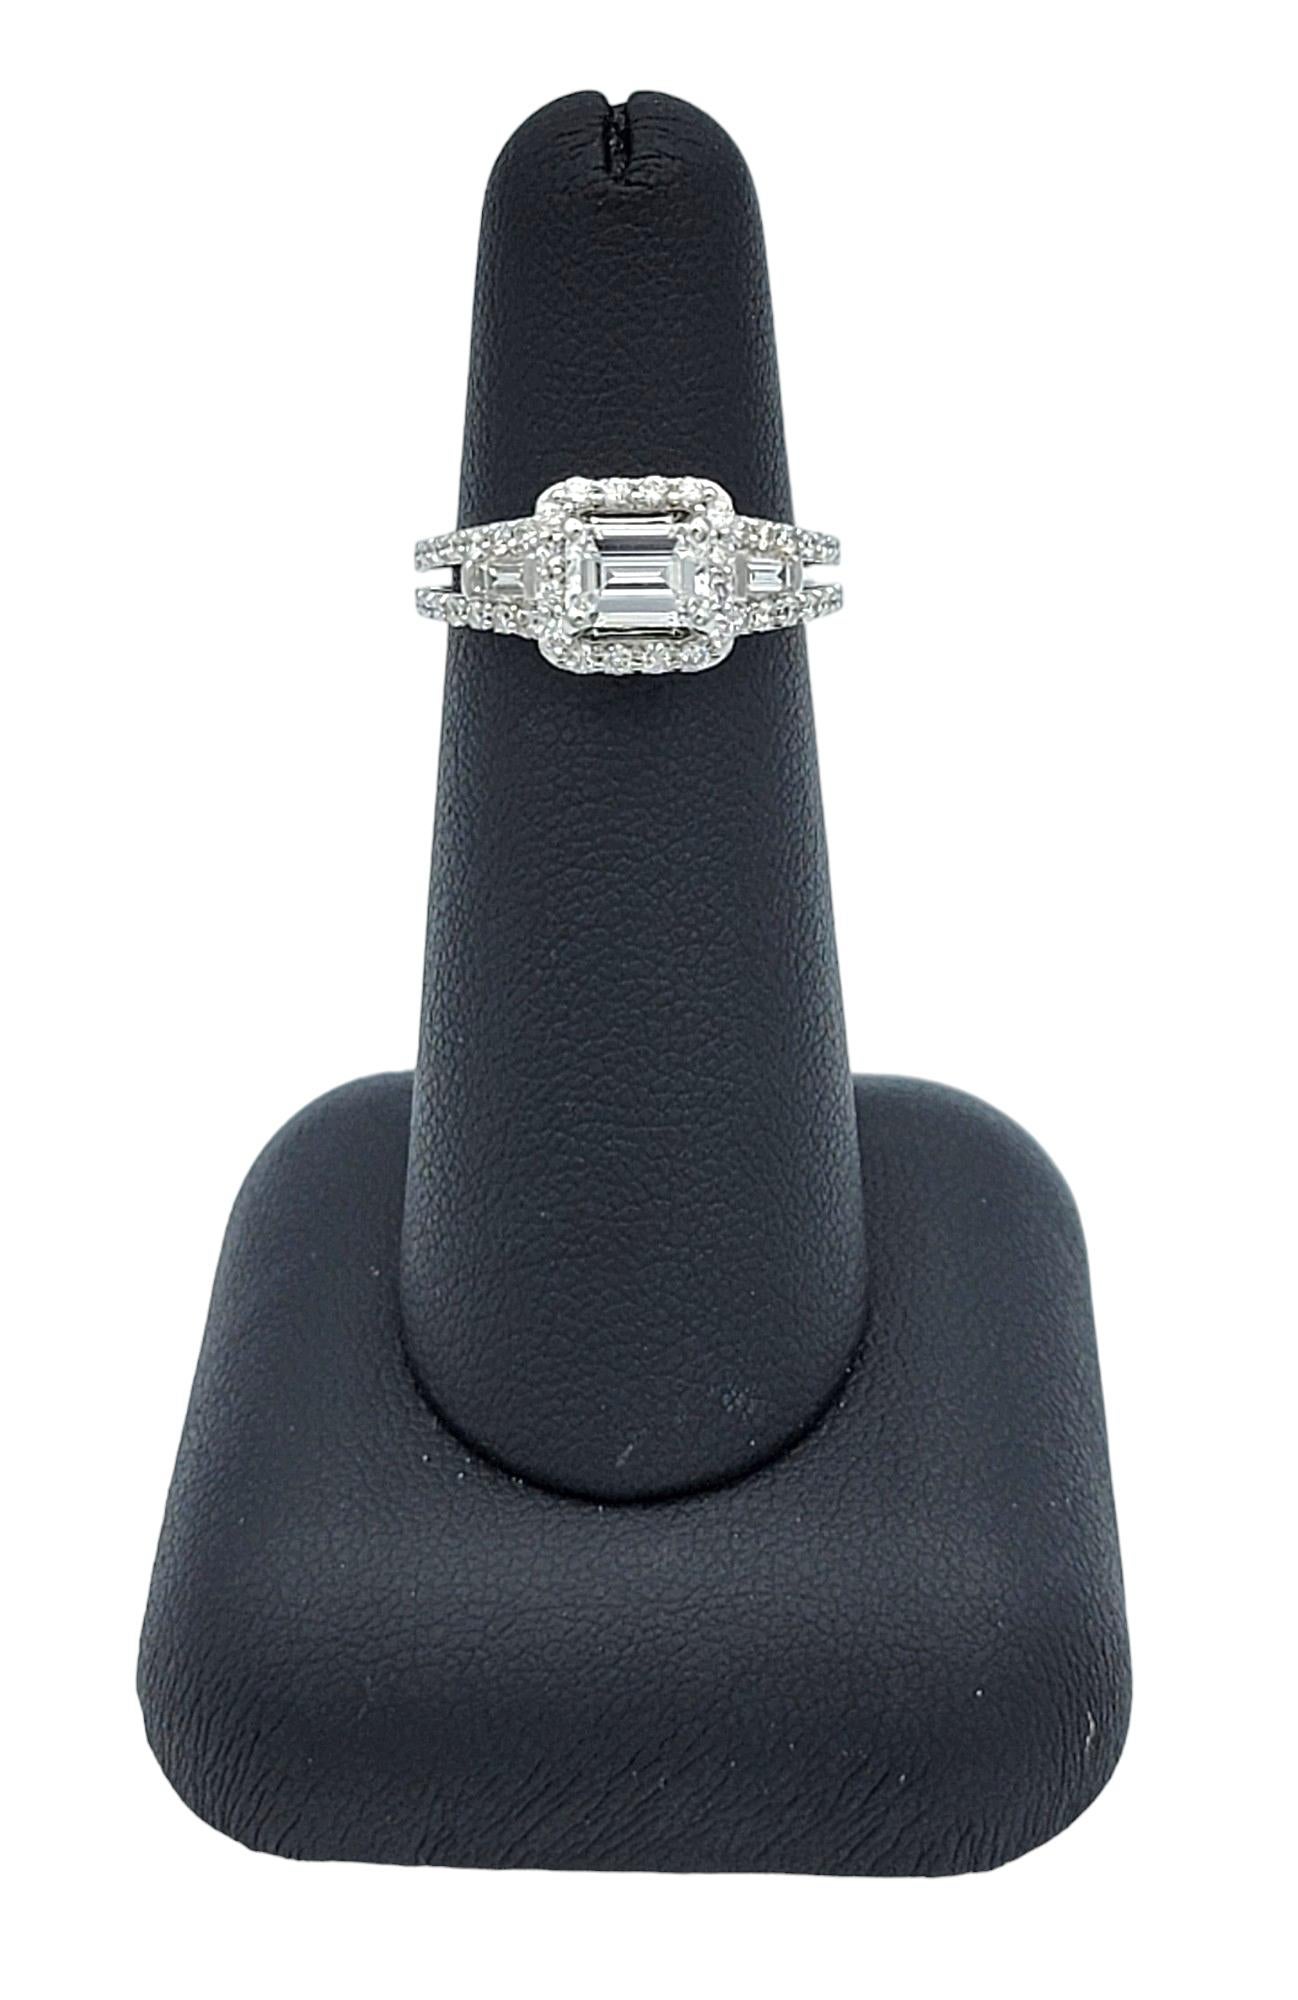 Emerald Cut Diamond and Squared Halo Engagement Ring White Gold, D-E / VVS1-VVS2 For Sale 4